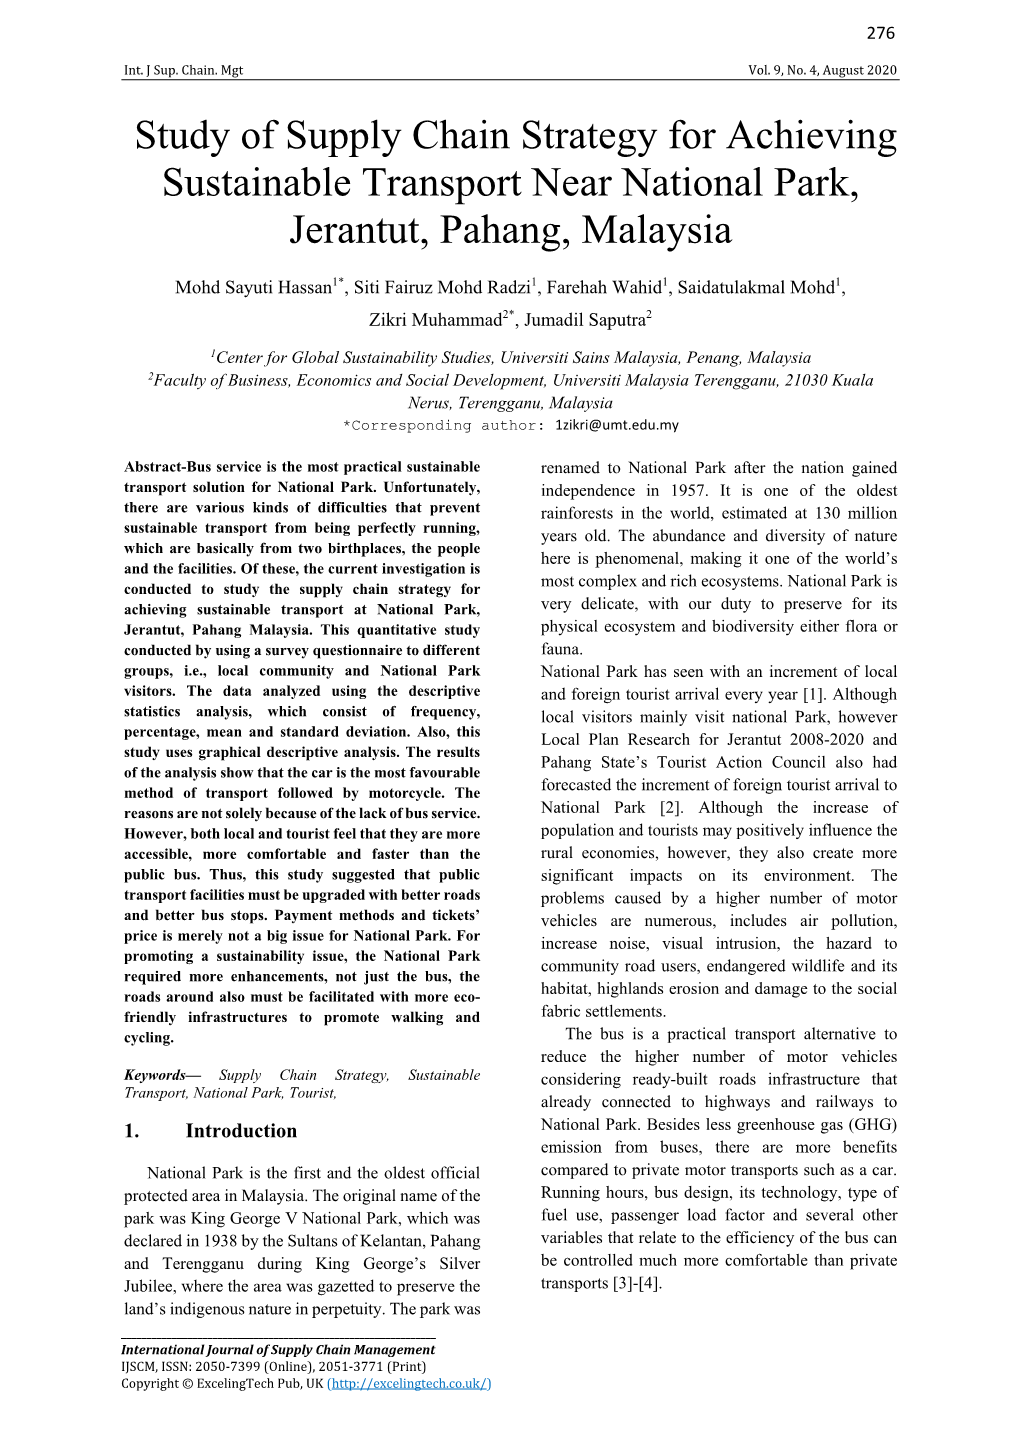 Study of Supply Chain Strategy for Achieving Sustainable Transport Near National Park, Jerantut, Pahang, Malaysia